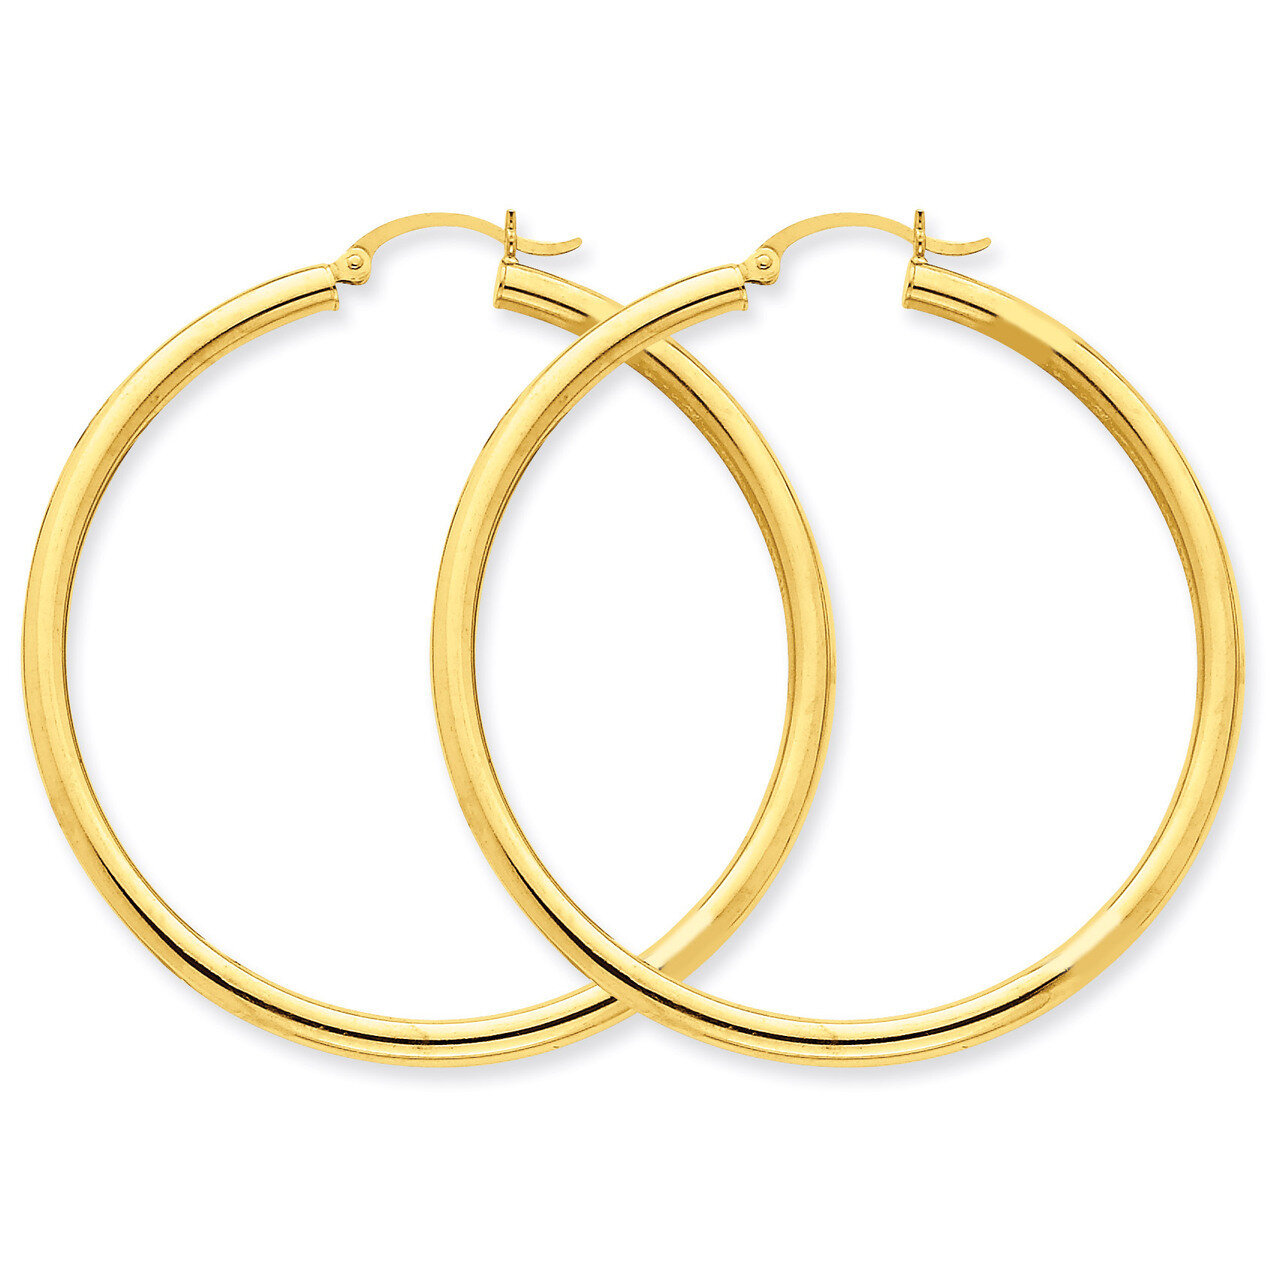 3mm Round Hoop Earrings 14k Gold Polished T943